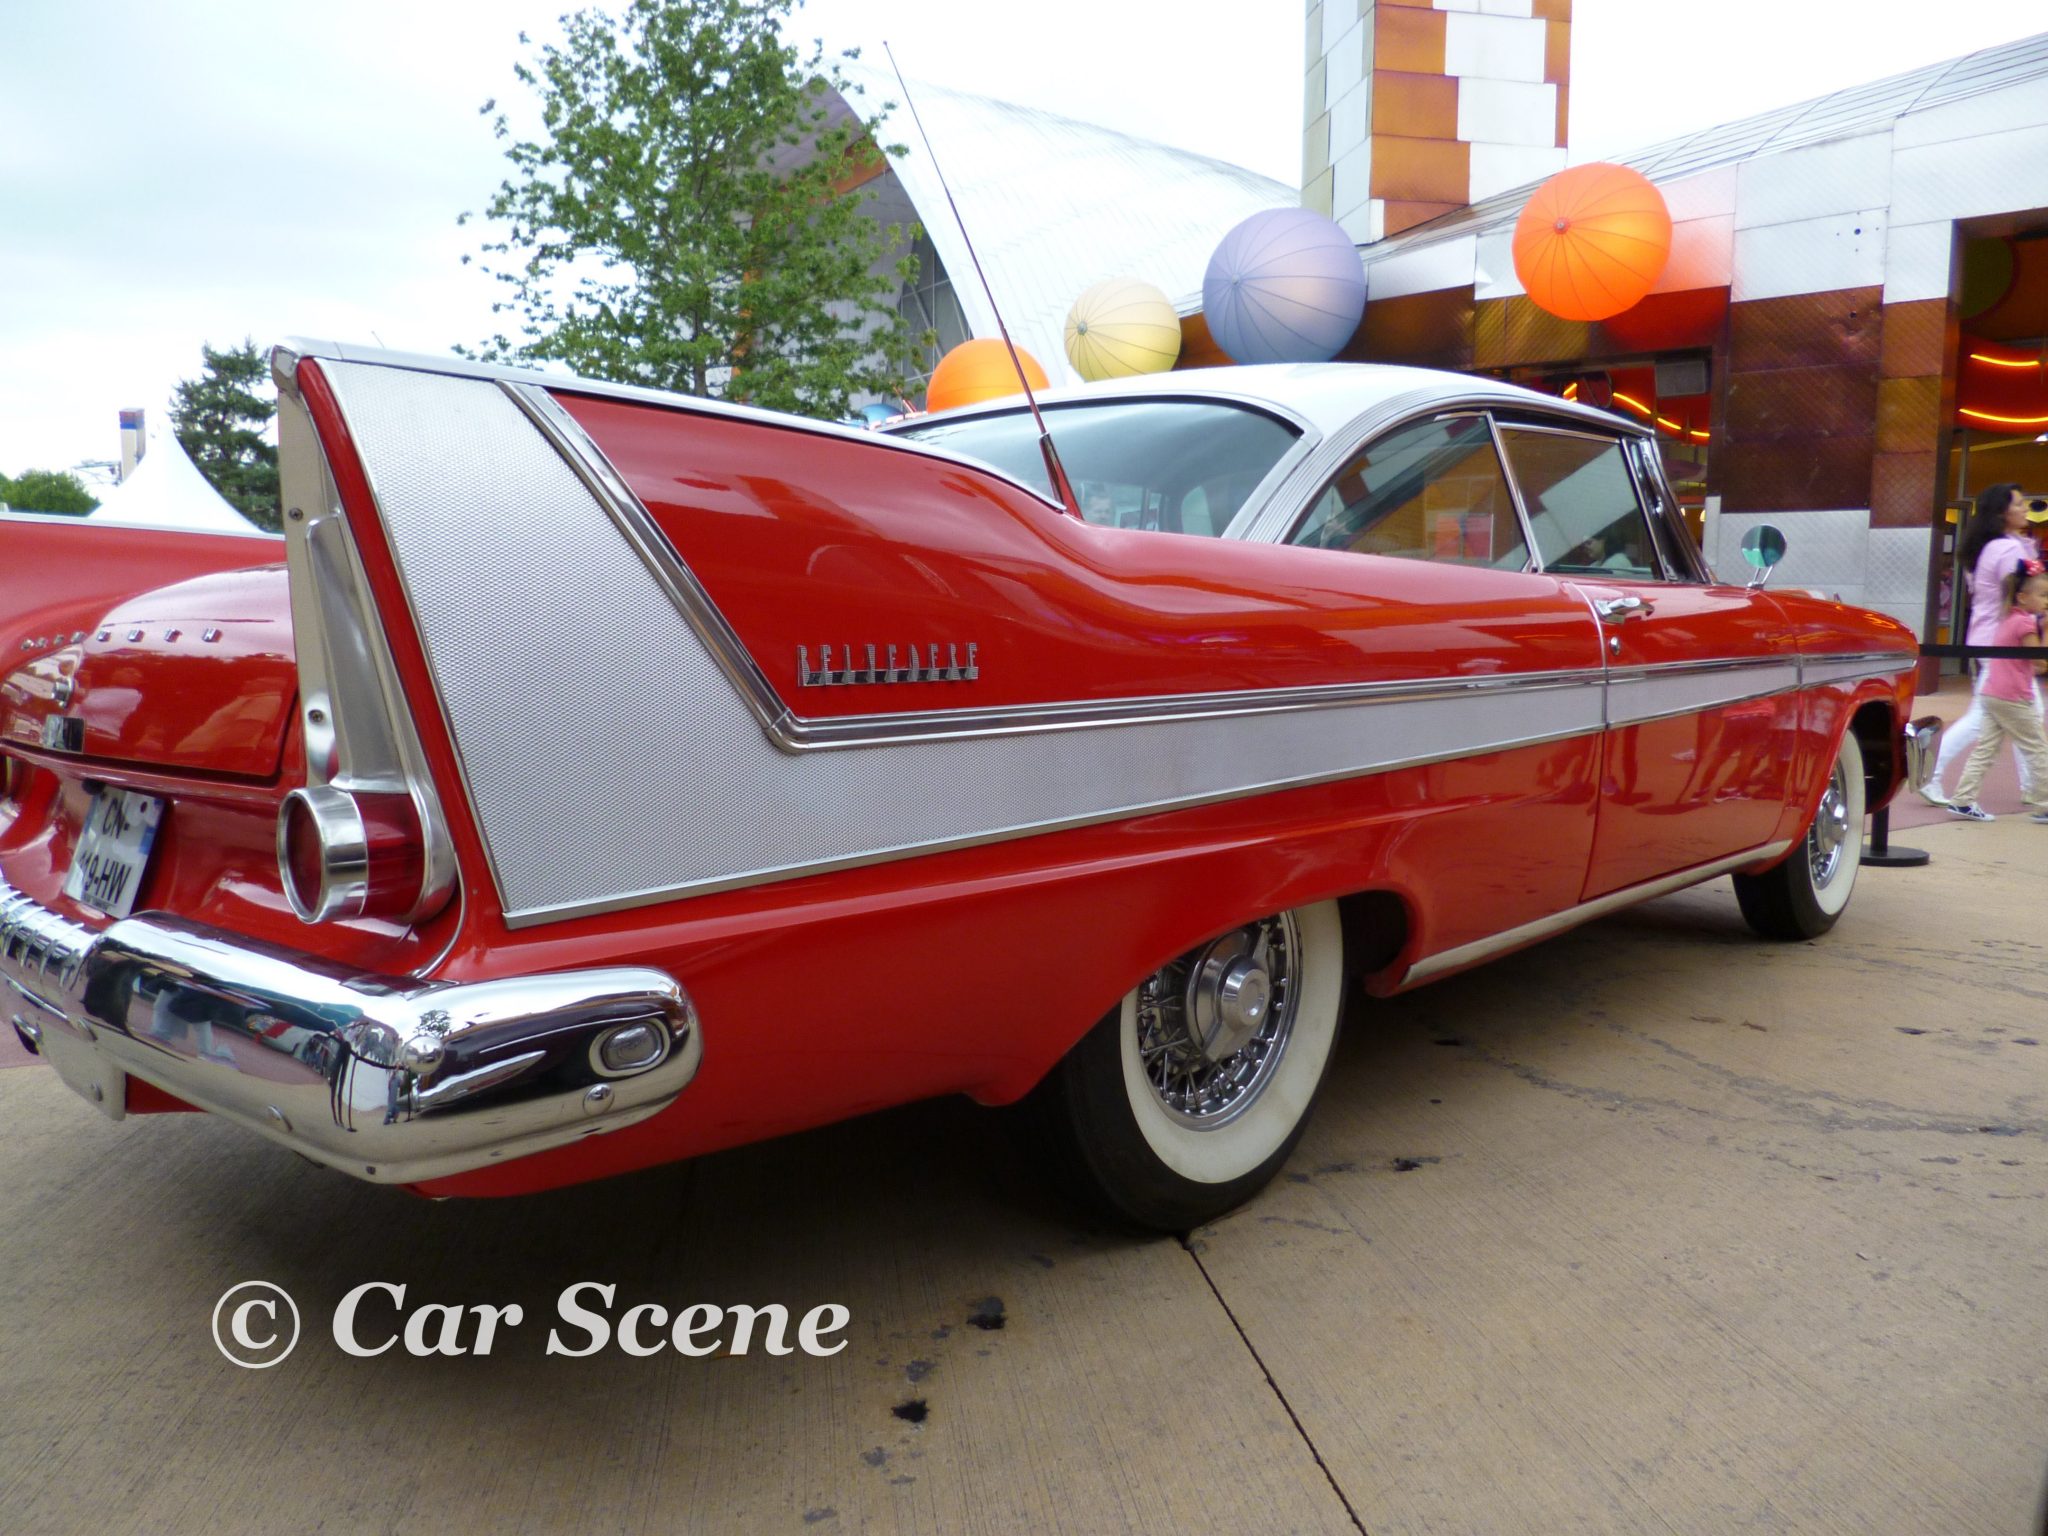 1958 Plymouth Belvedere rear side view